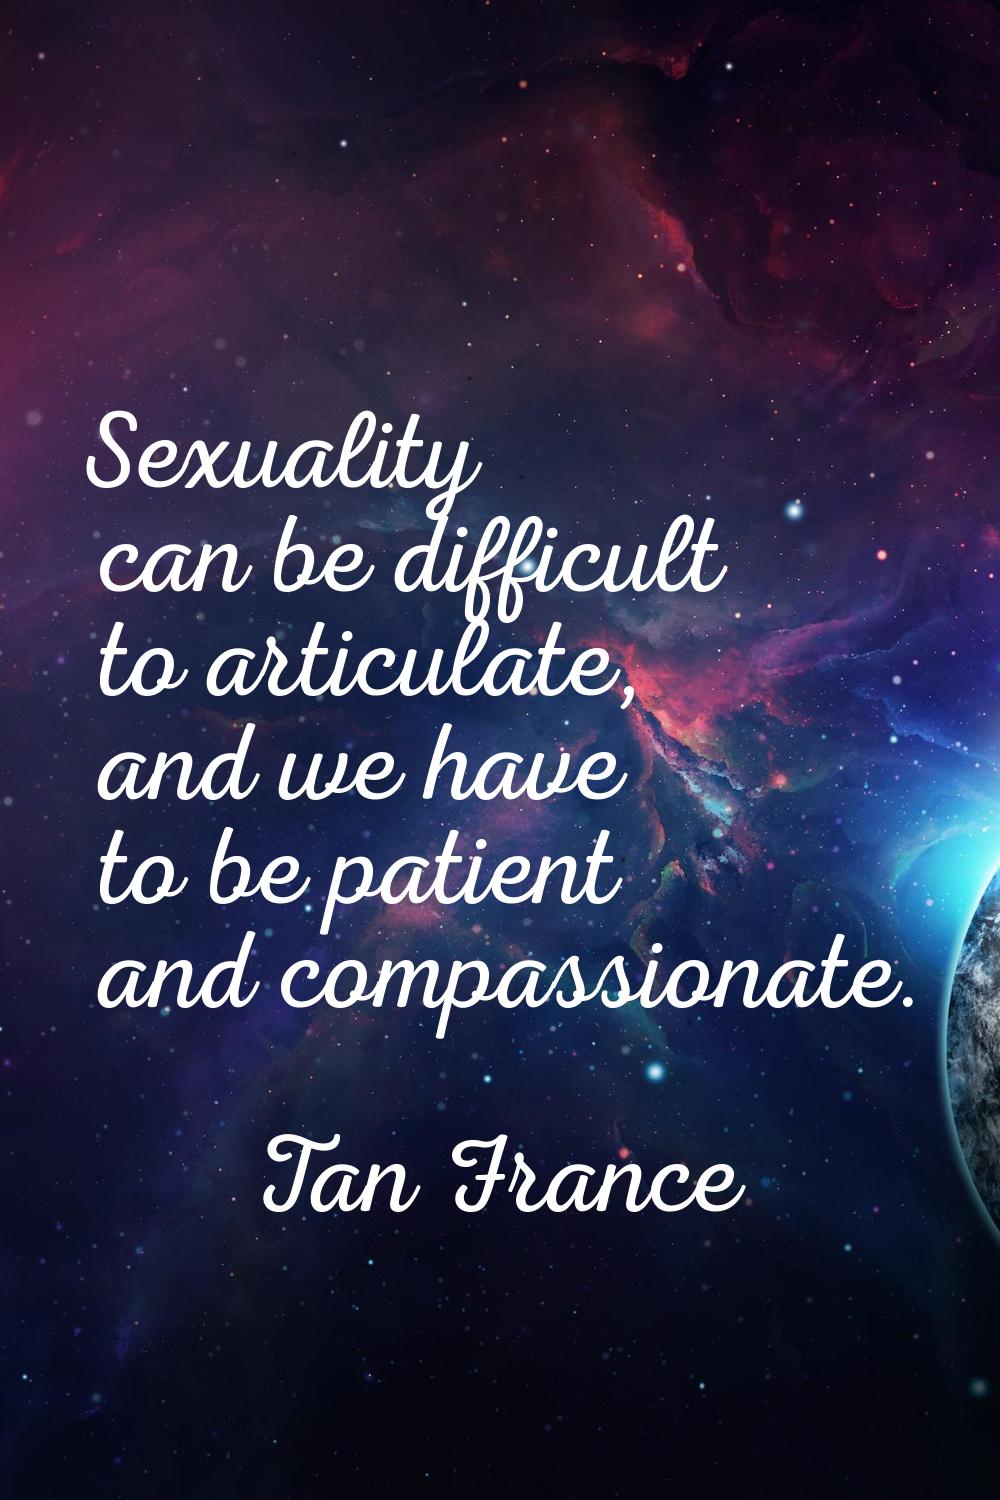 Sexuality can be difficult to articulate, and we have to be patient and compassionate.